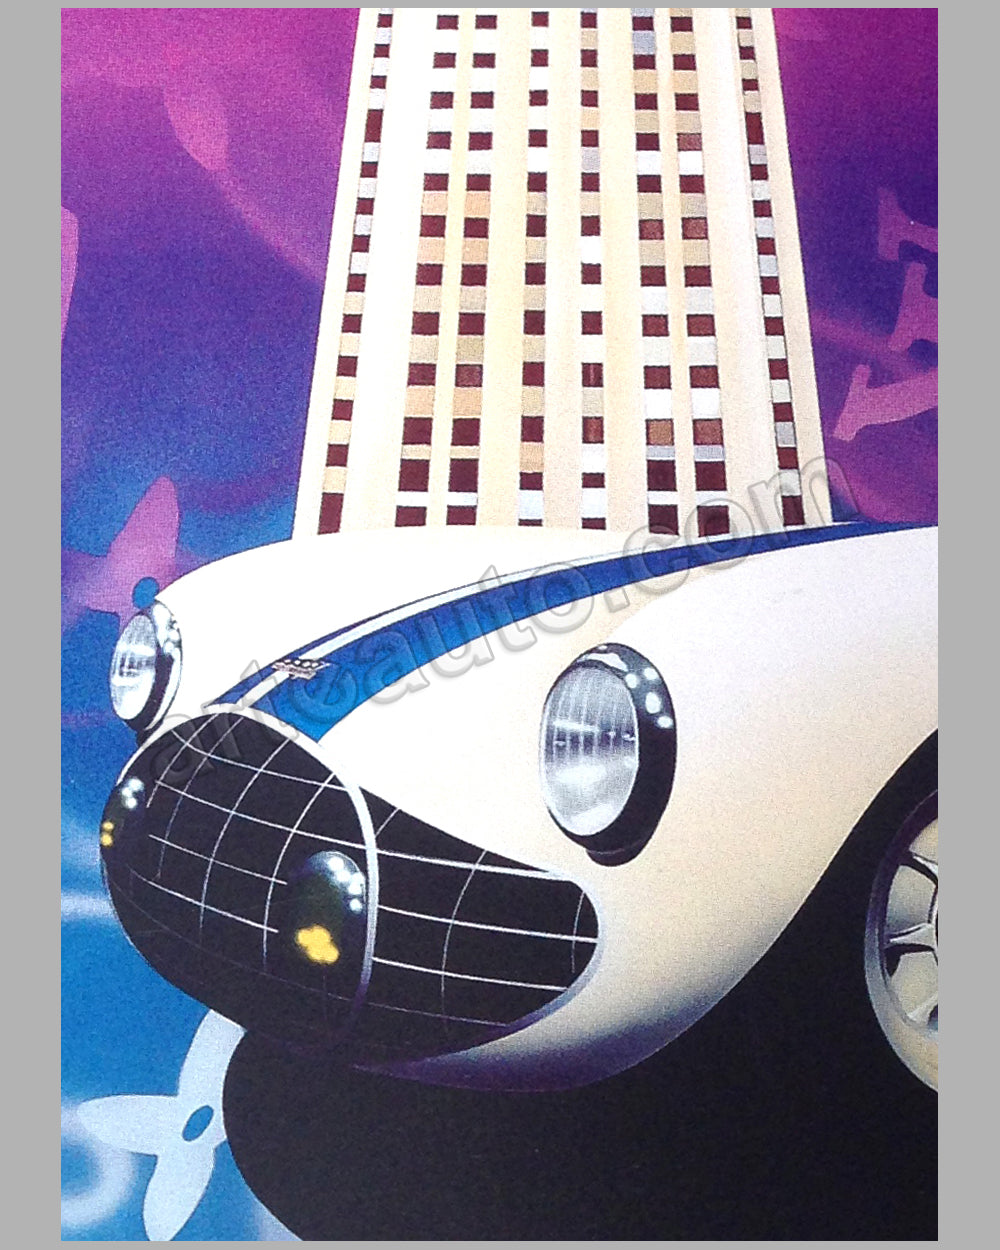 Louis Vuitton Classic at Rockefeller Center 1999 large poster by Razzia  Temporarily Out of Stock$625.00